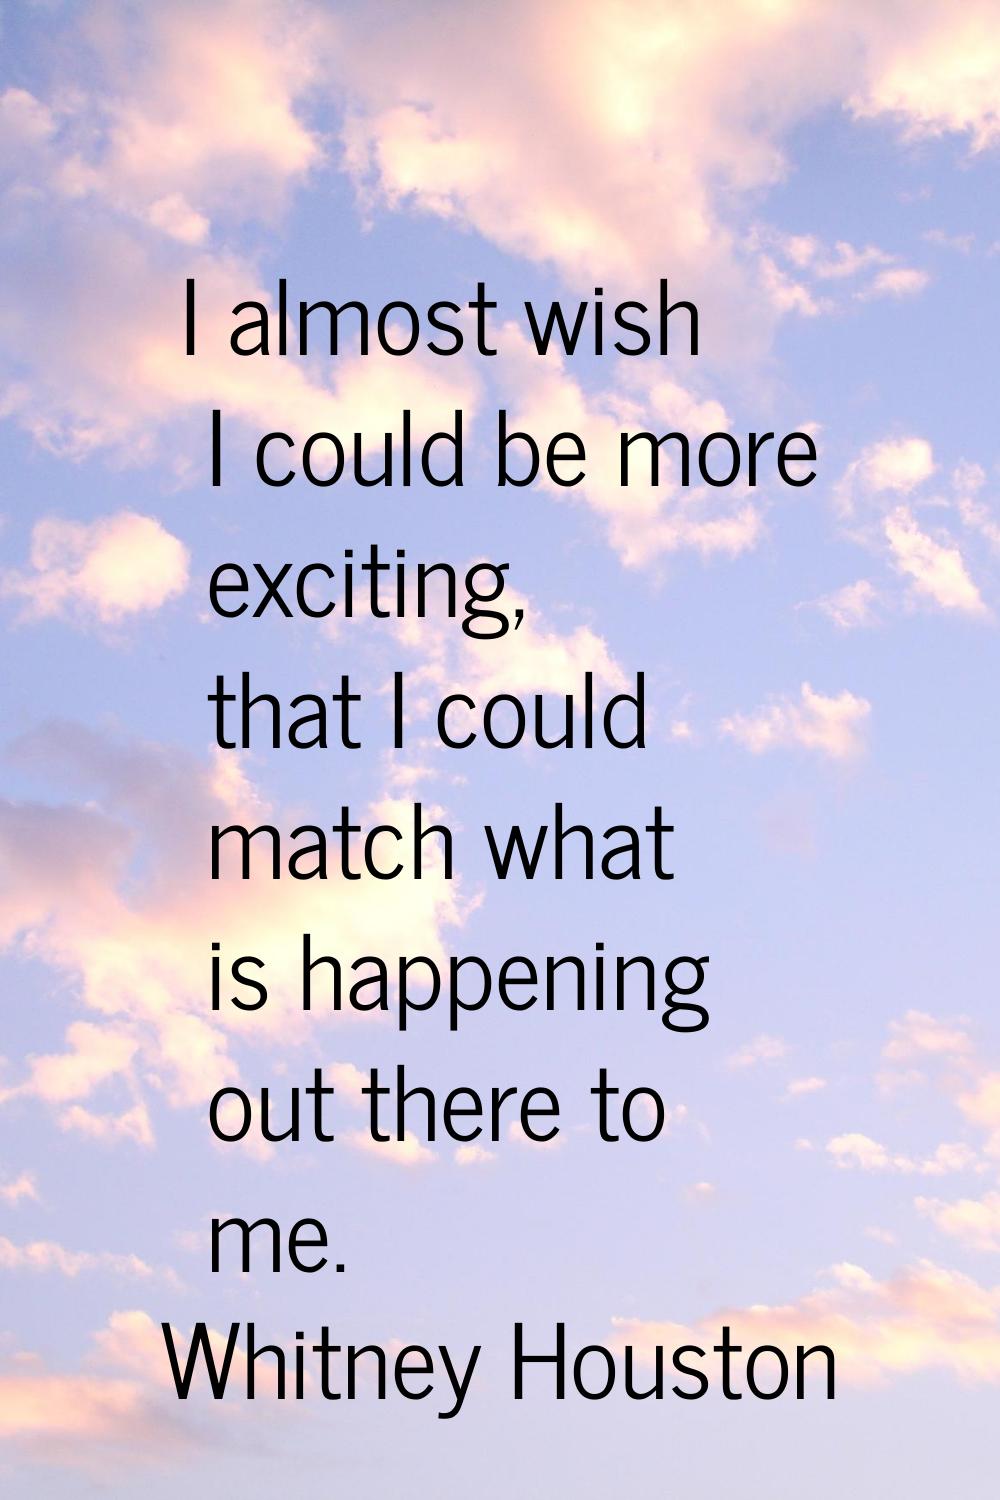 I almost wish I could be more exciting, that I could match what is happening out there to me.